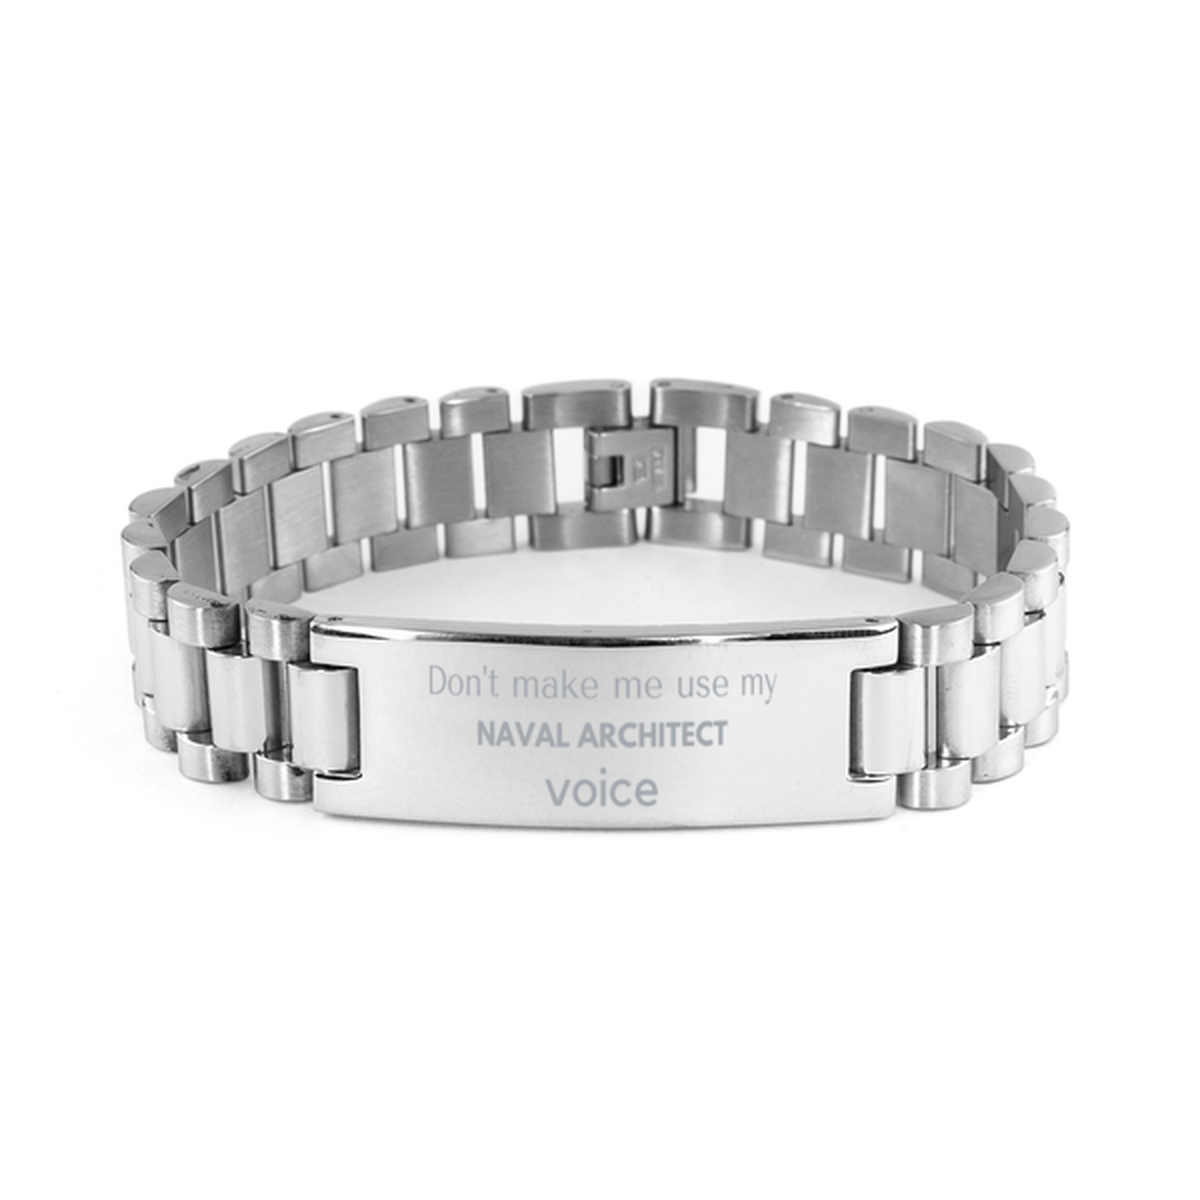 Don't make me use my Naval Architect voice, Sarcasm Naval Architect Gifts, Christmas Naval Architect Ladder Stainless Steel Bracelet Birthday Unique Gifts For Naval Architect Coworkers, Men, Women, Colleague, Friends